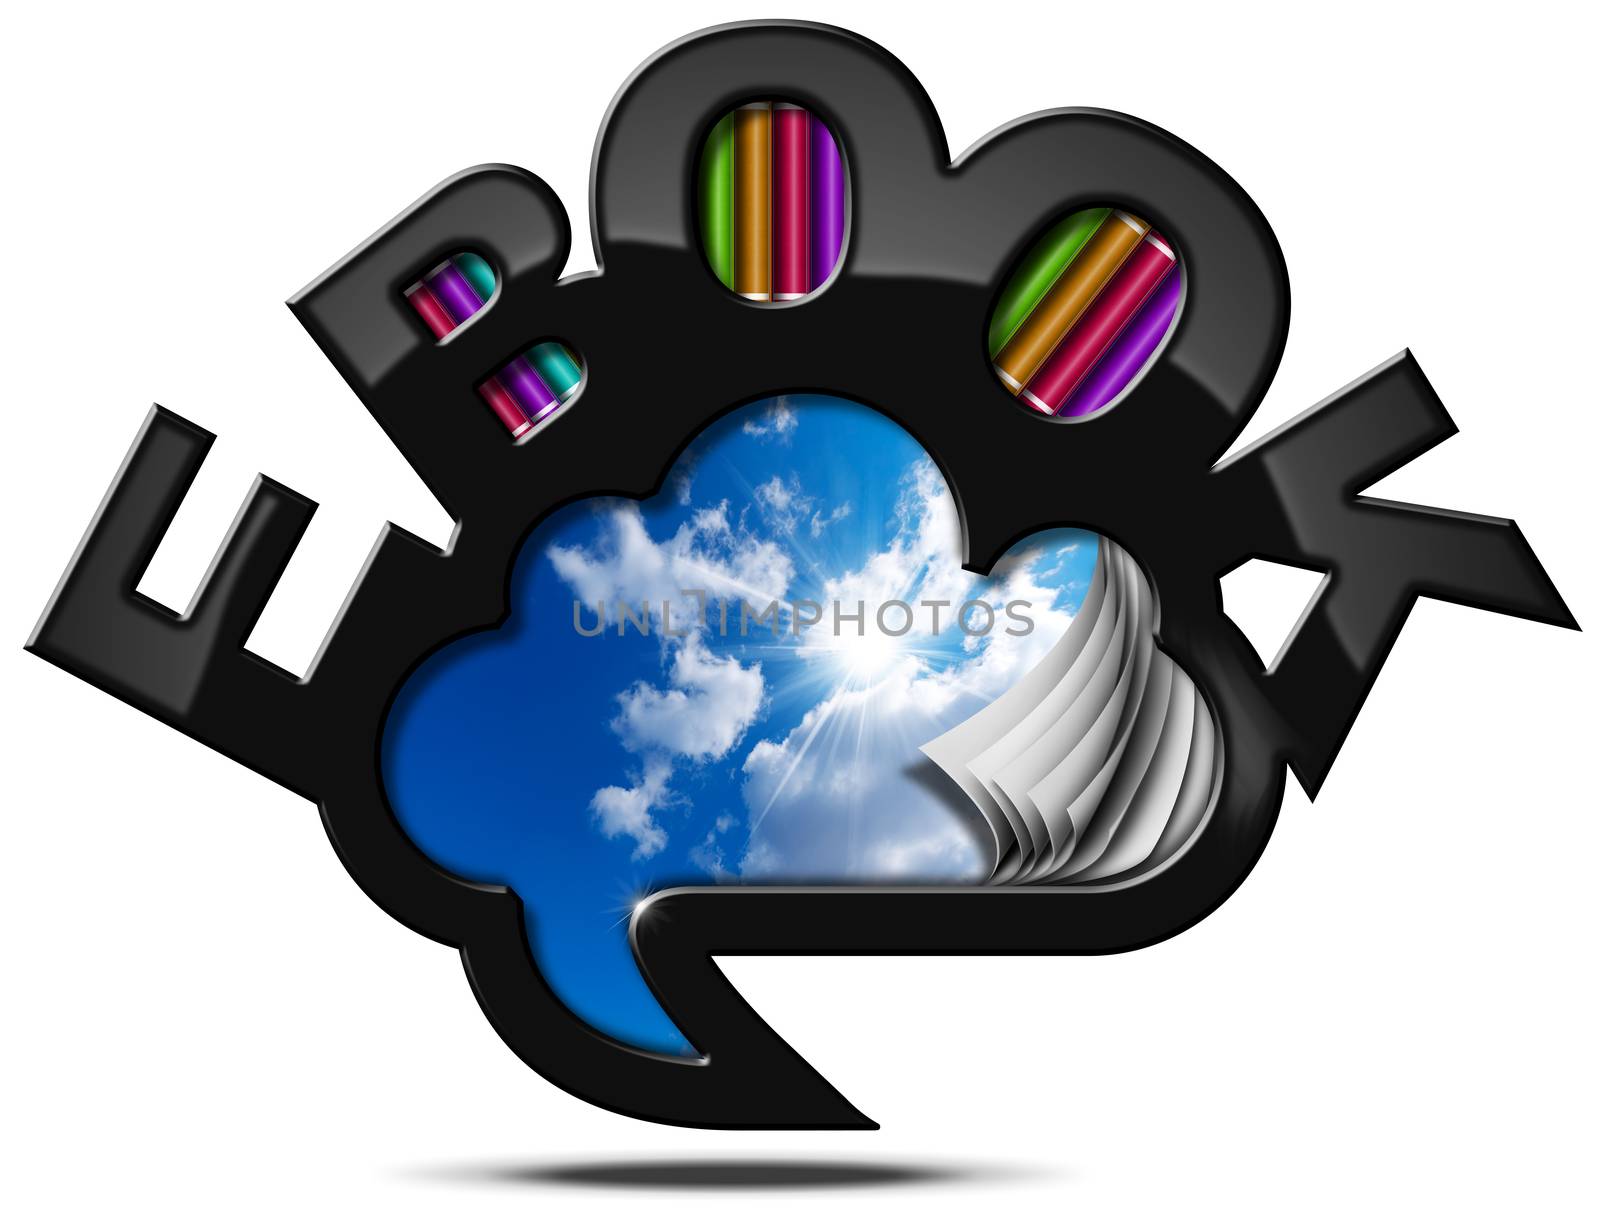 Speech bubble in the shape of a cloud with sky and clouds, curled pages and text E-book in the shape of modern library